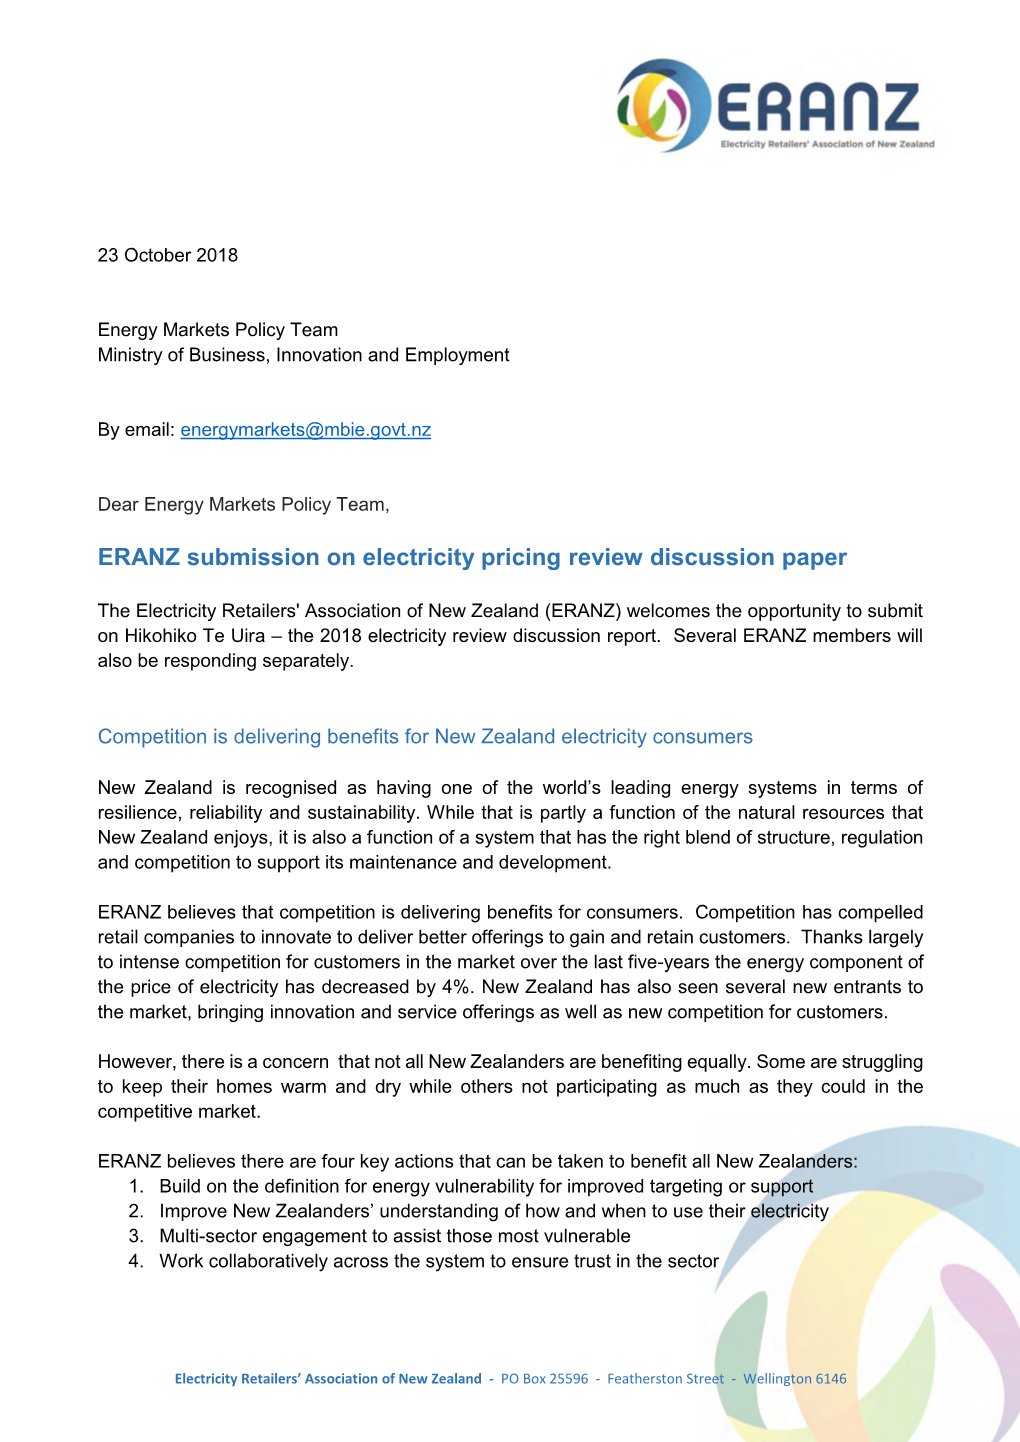 ERANZ Submission on Electricity Pricing Review Discussion Paper